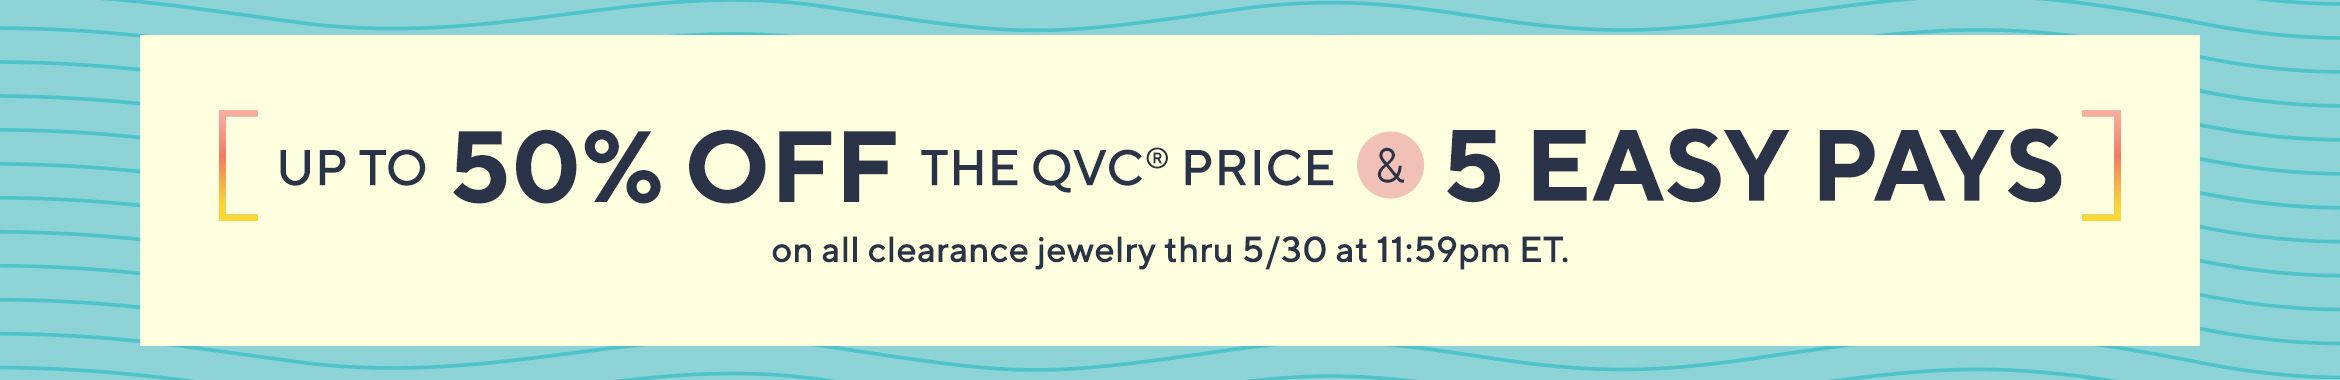 Up to 50% Off the QVC® Price & 5 Easy Pays on all clearance jewelry thru 5/30 at 11:59pm ET. 